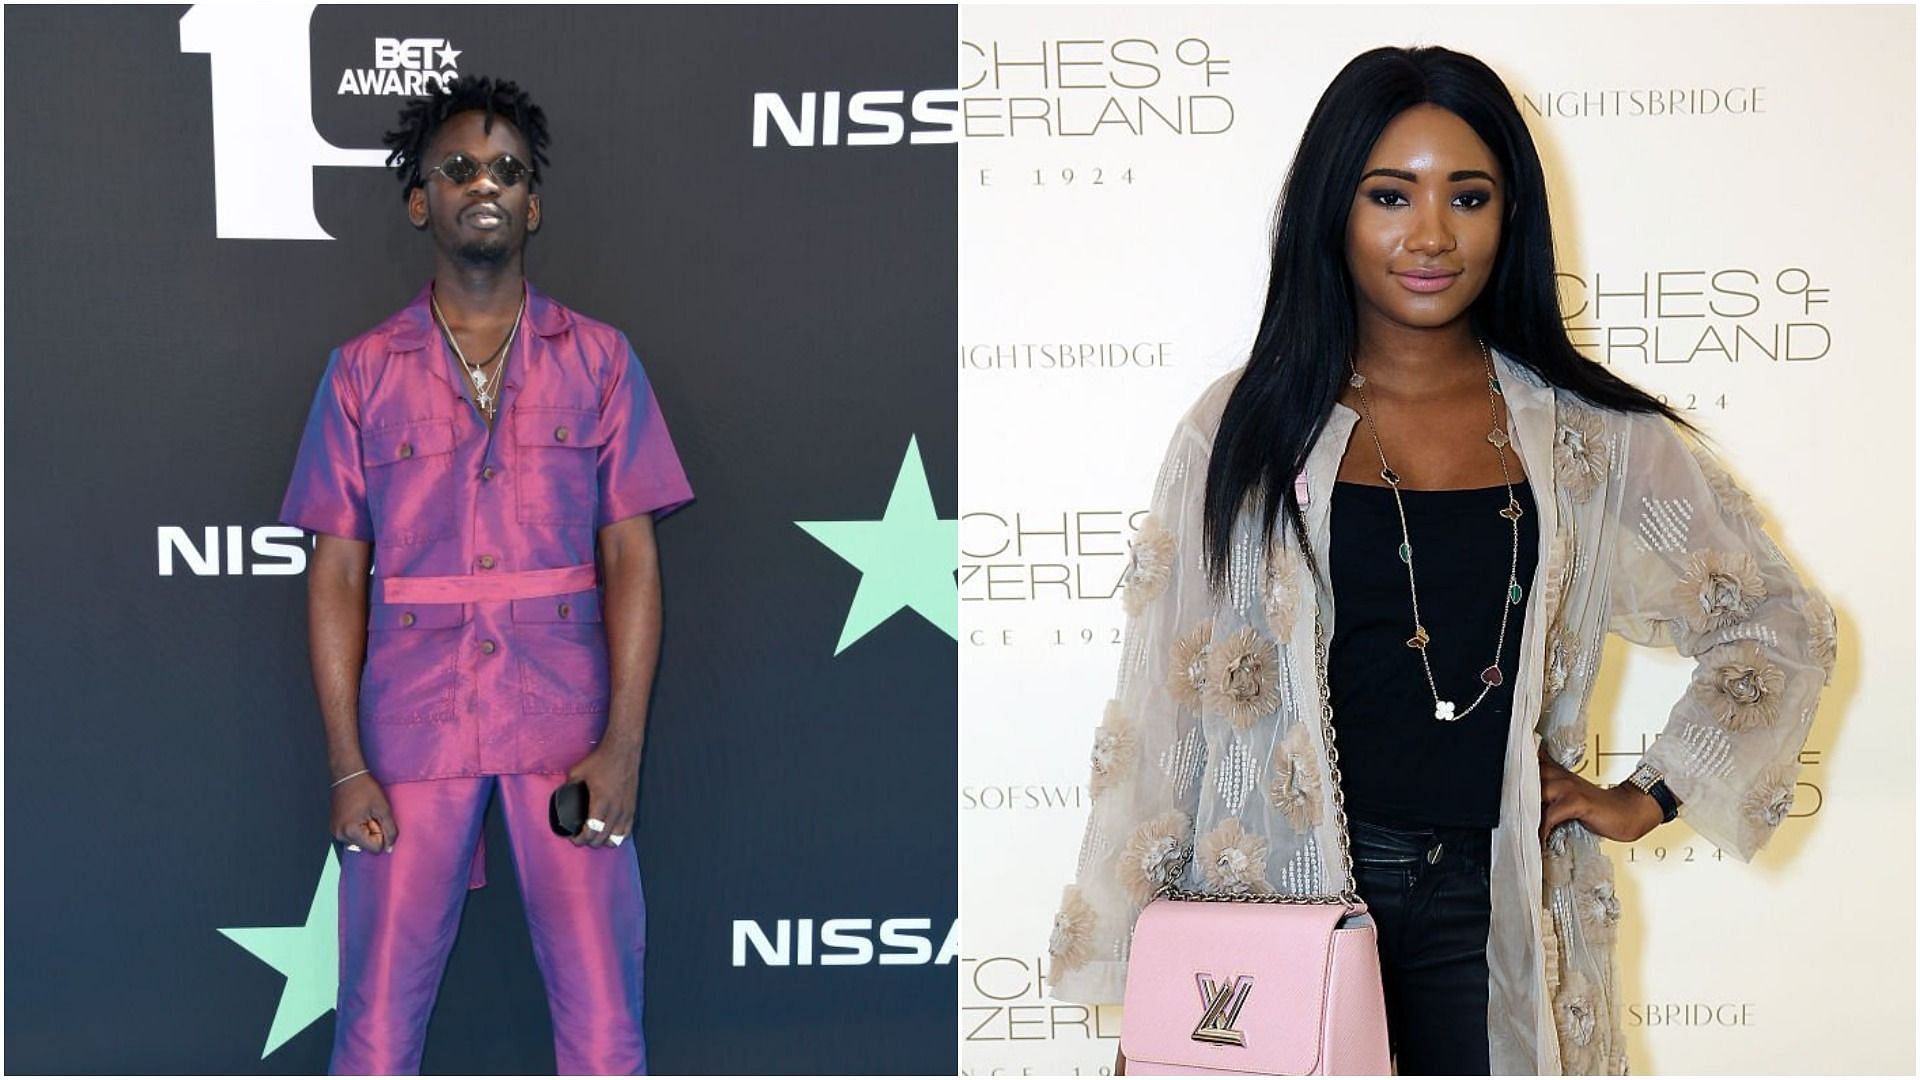 Mr. Eazi proposed to his longtime girlfriend Temi Otedola (Images via Frazer Harrison and David M. Benett/Getty Images)